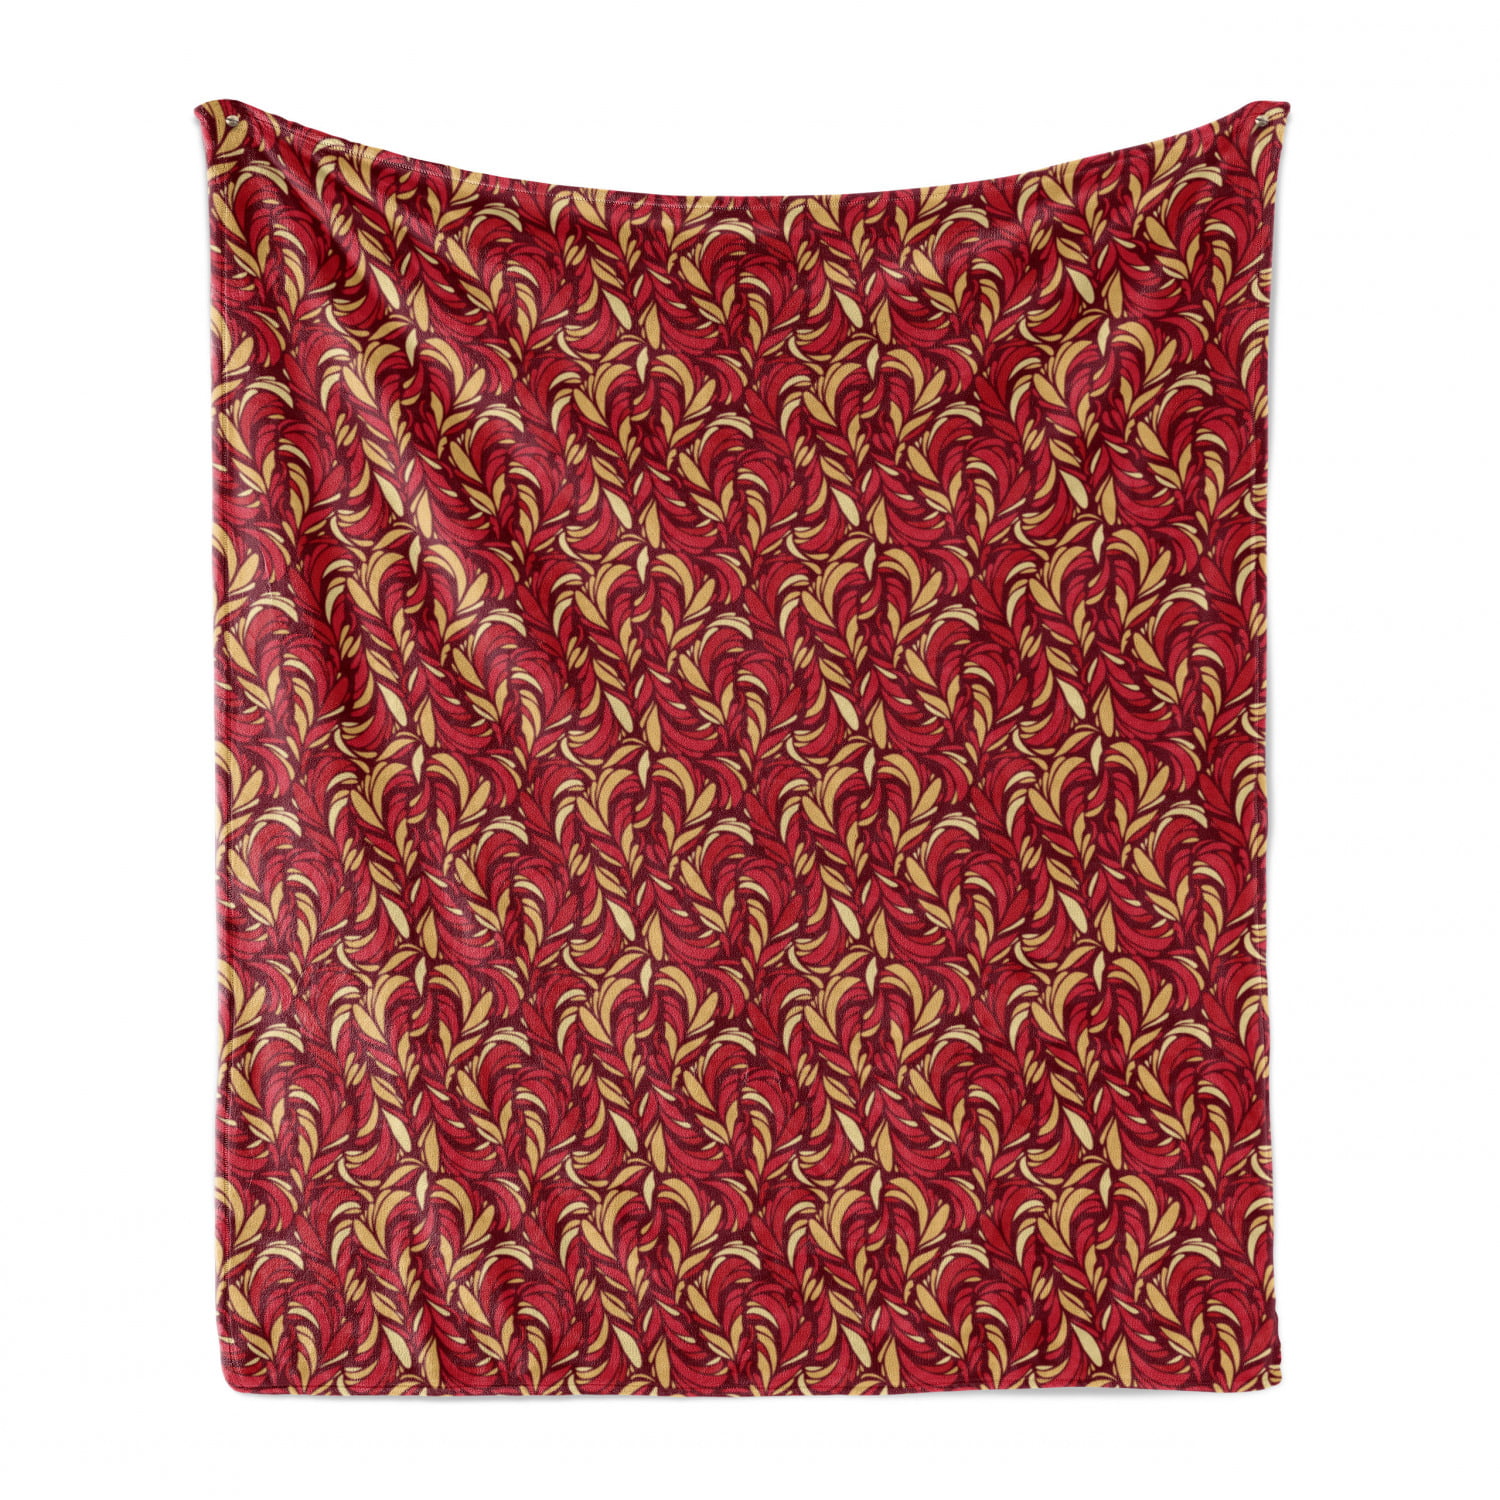 Cozy Plush for Indoor and Outdoor Use Ambesonne Leaves Soft Flannel Fleece Throw Blanket Abstract Colored Foliage Pattern with Coming of The Spring Theme Image 50 x 70 Vermilion Ruby Beige 